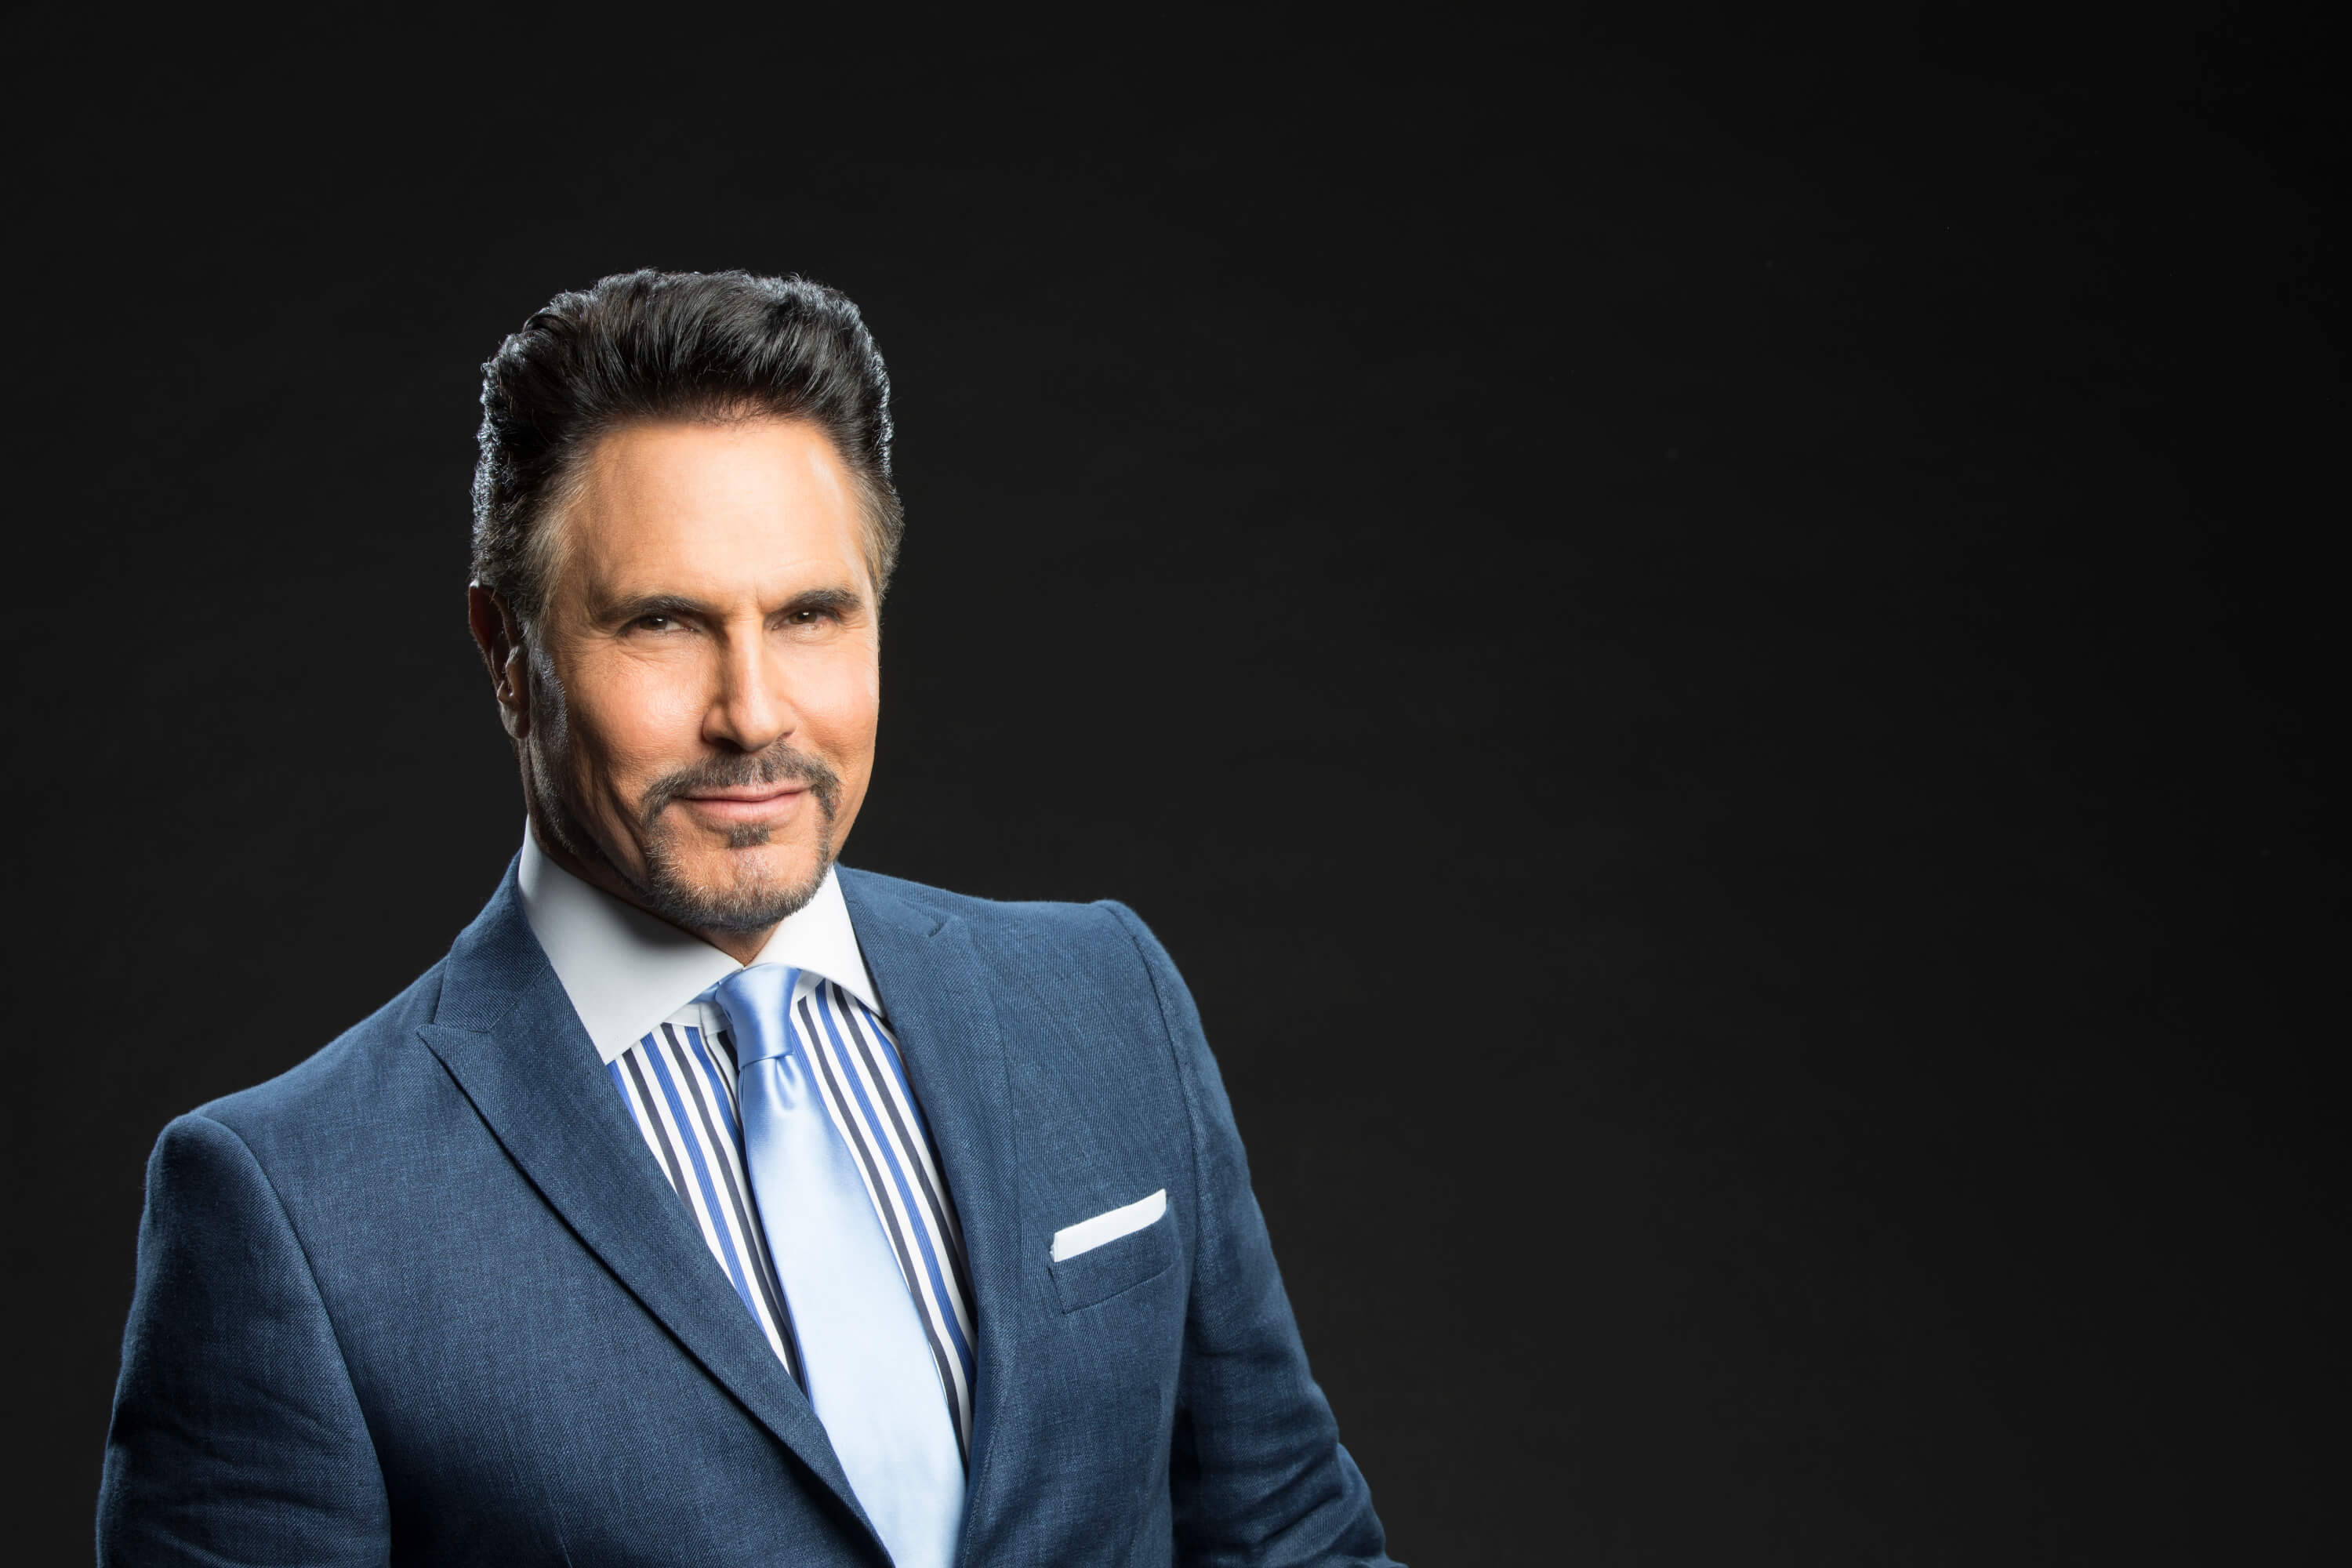 'The Bold and the Beautiful' star Don Diamont dressed in a blue suit; posing in front of a black backdrop.